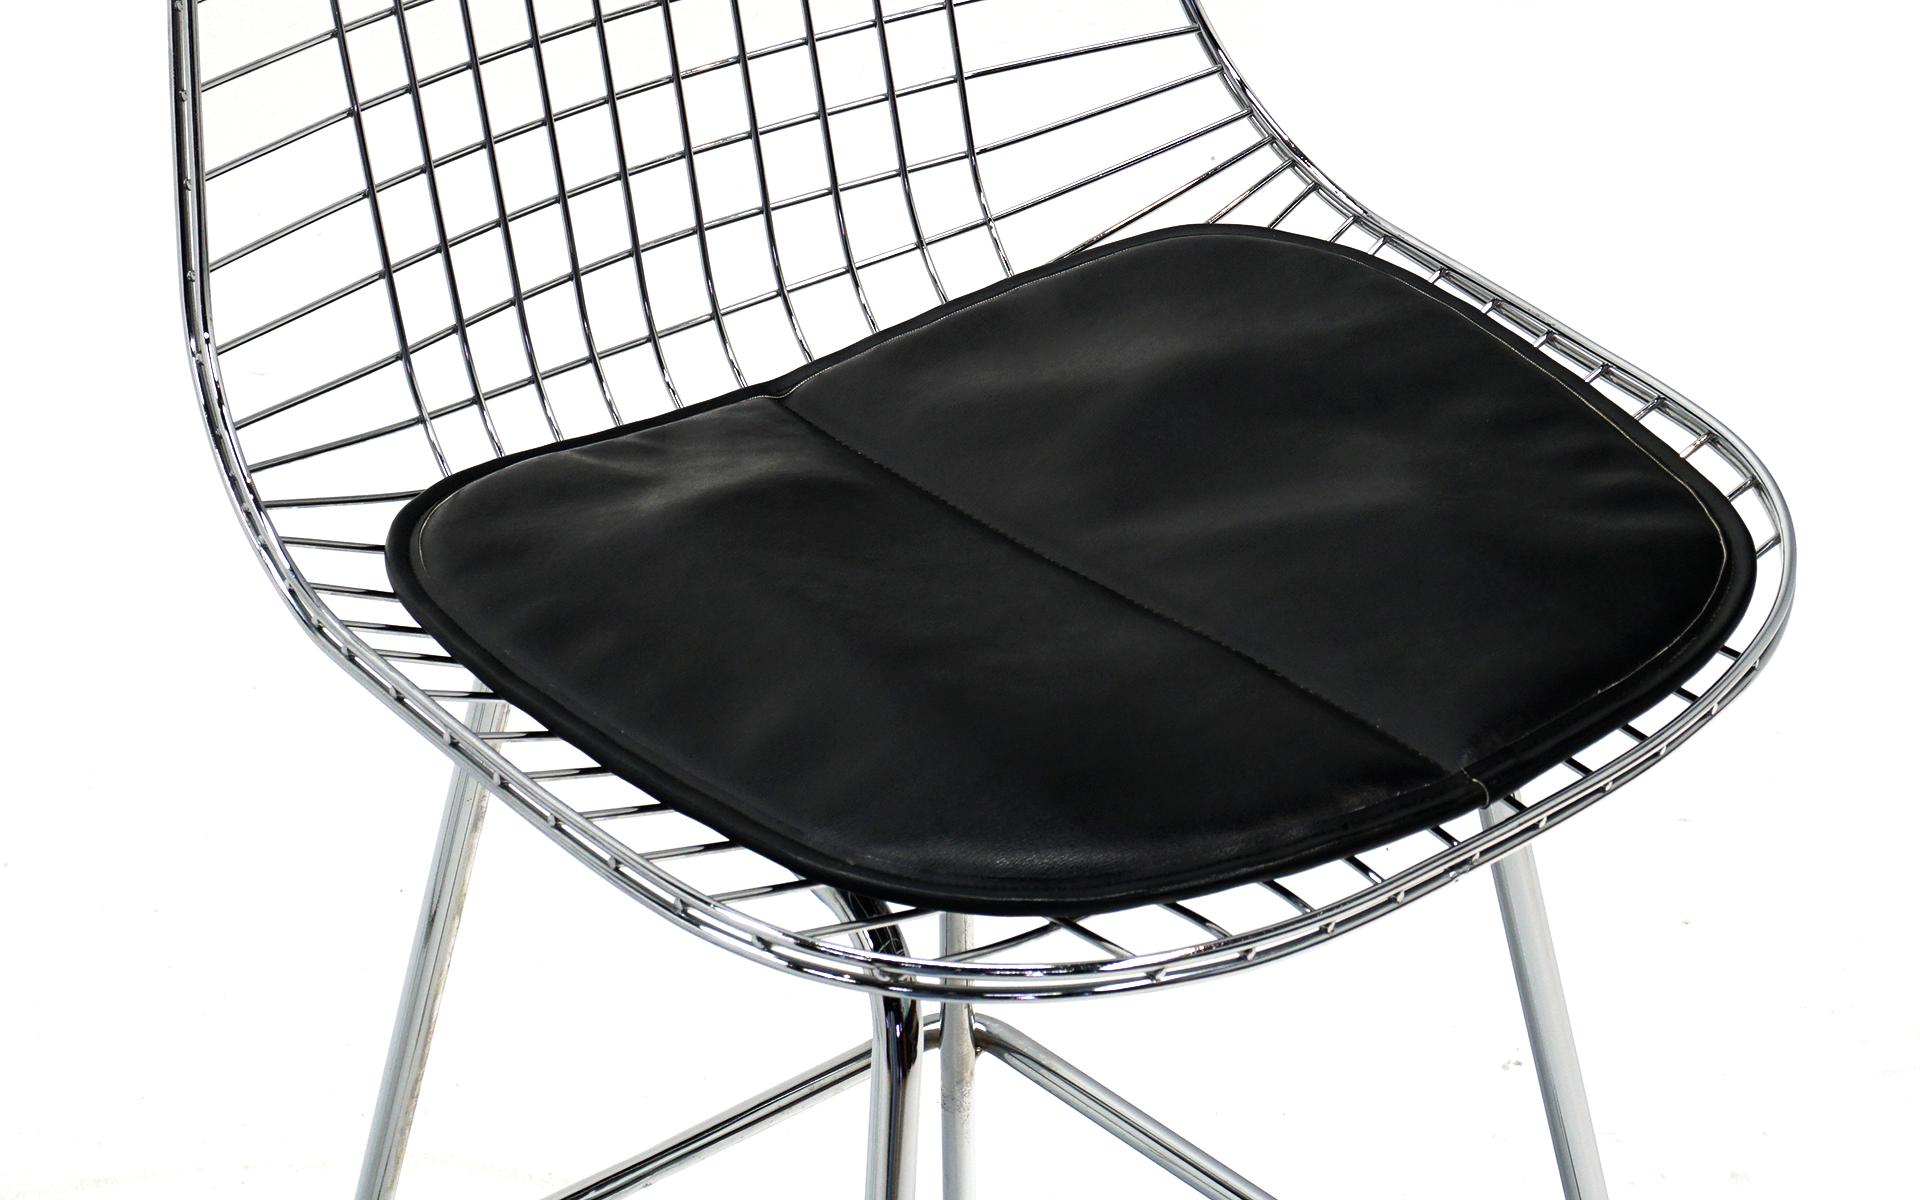 American Pair of Wire Barstools by Charles and Ray Eames, Chrome with Black Leather Pads